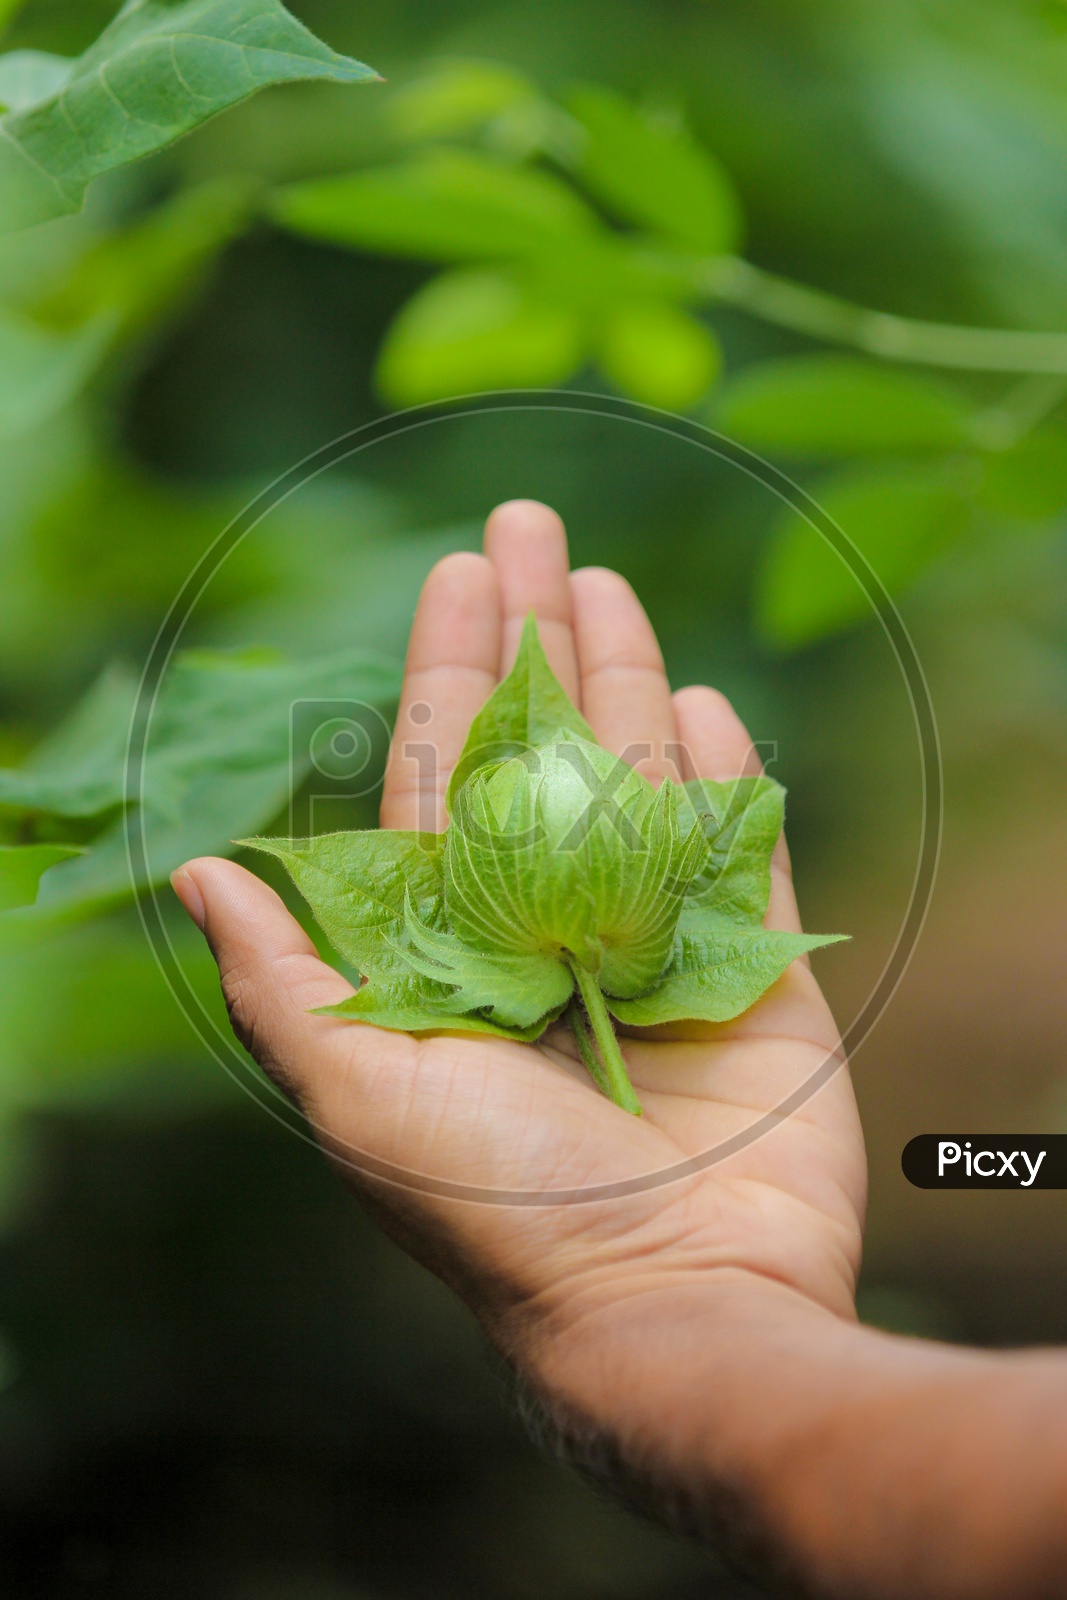 Green Raw Cotton Ball in Hands in a Cotton Field